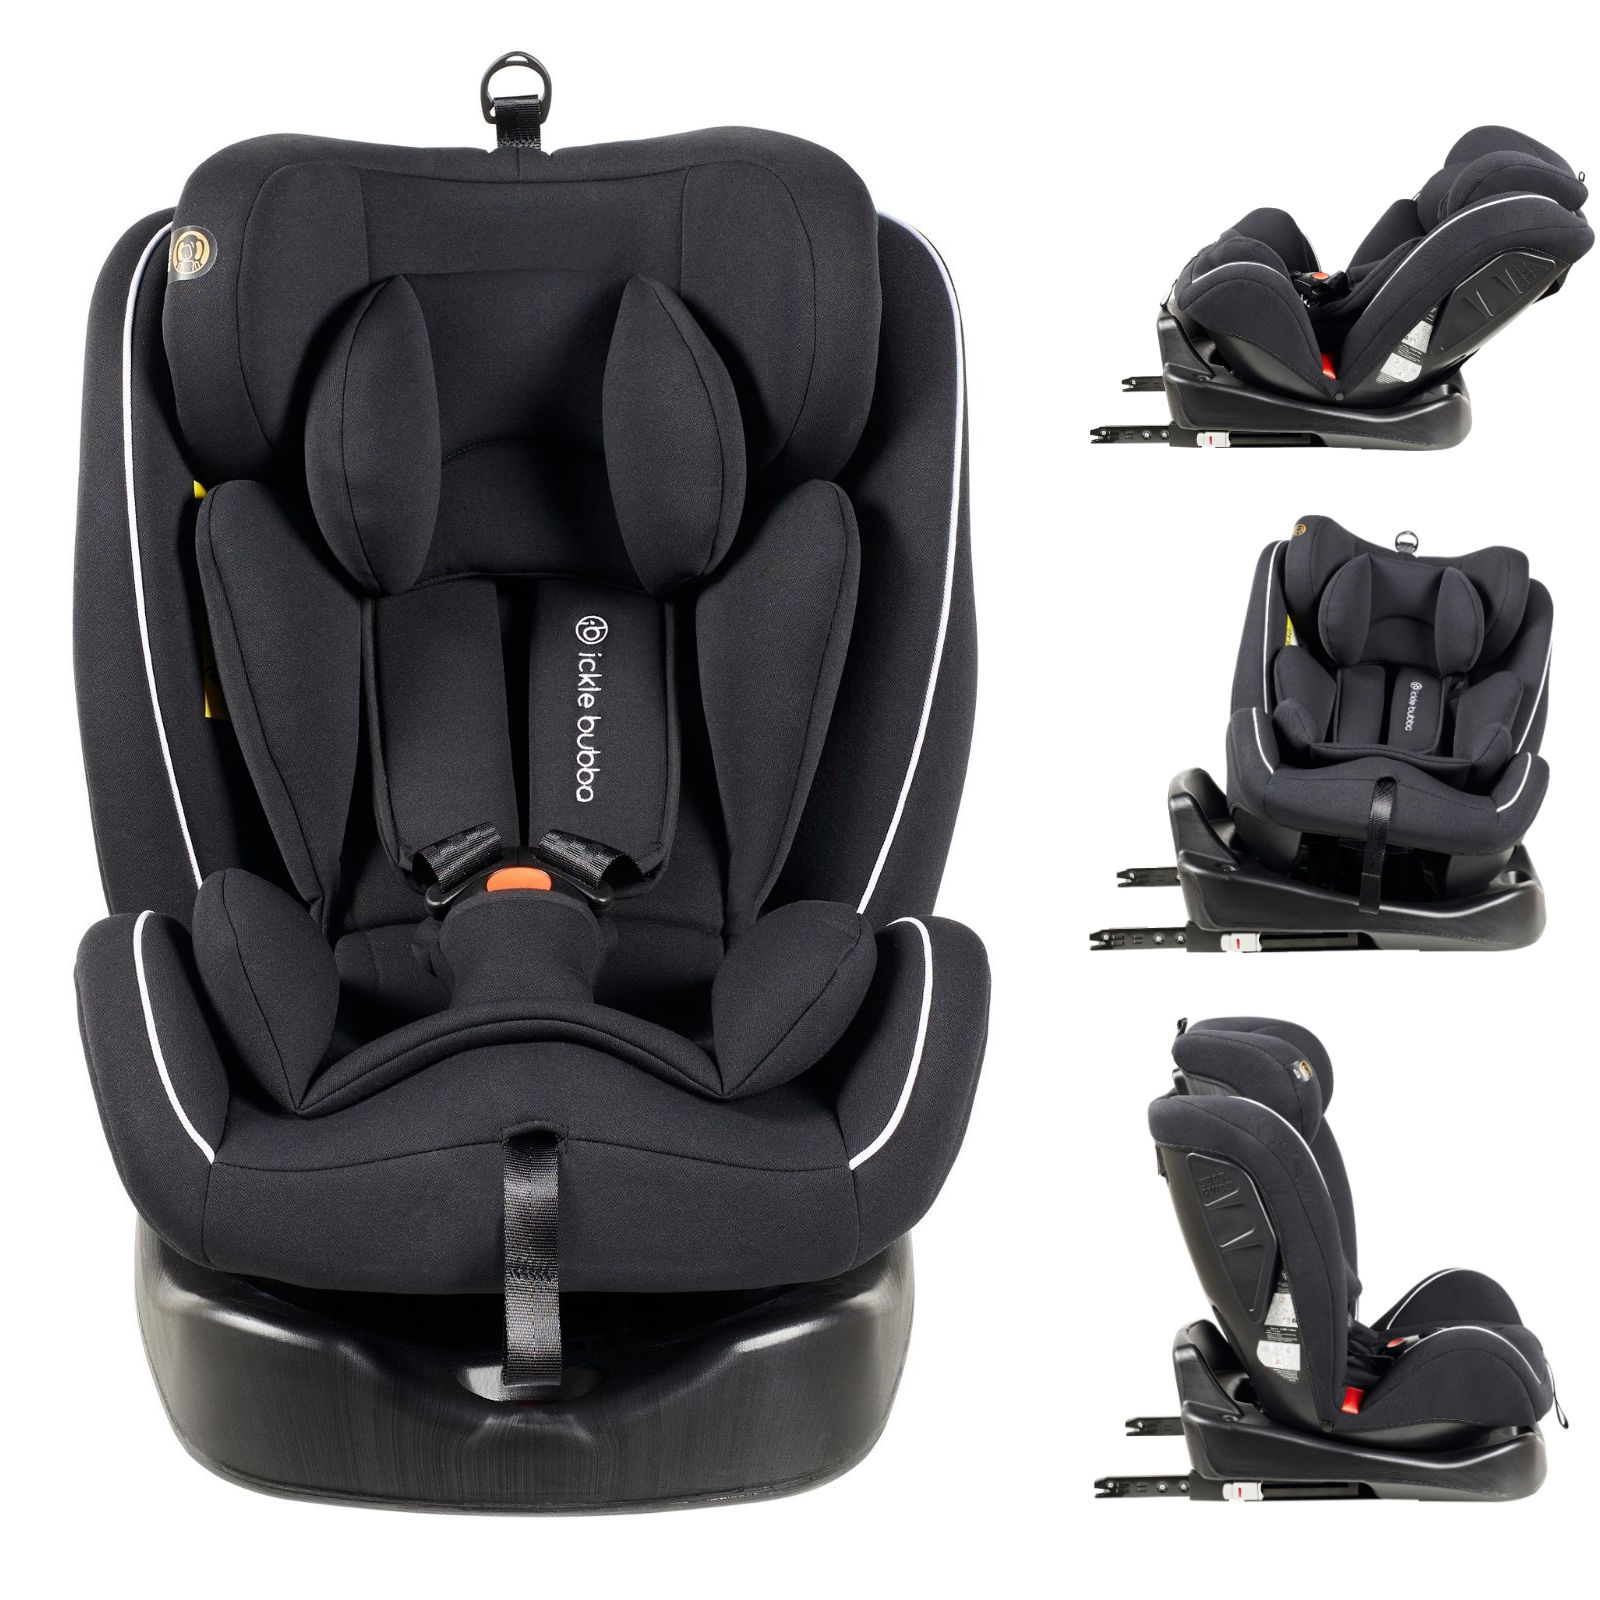 Ickle Bubba Rotator 360° Spin Group 0+/1/2/3 Car Seat - Black (0-12 Years)